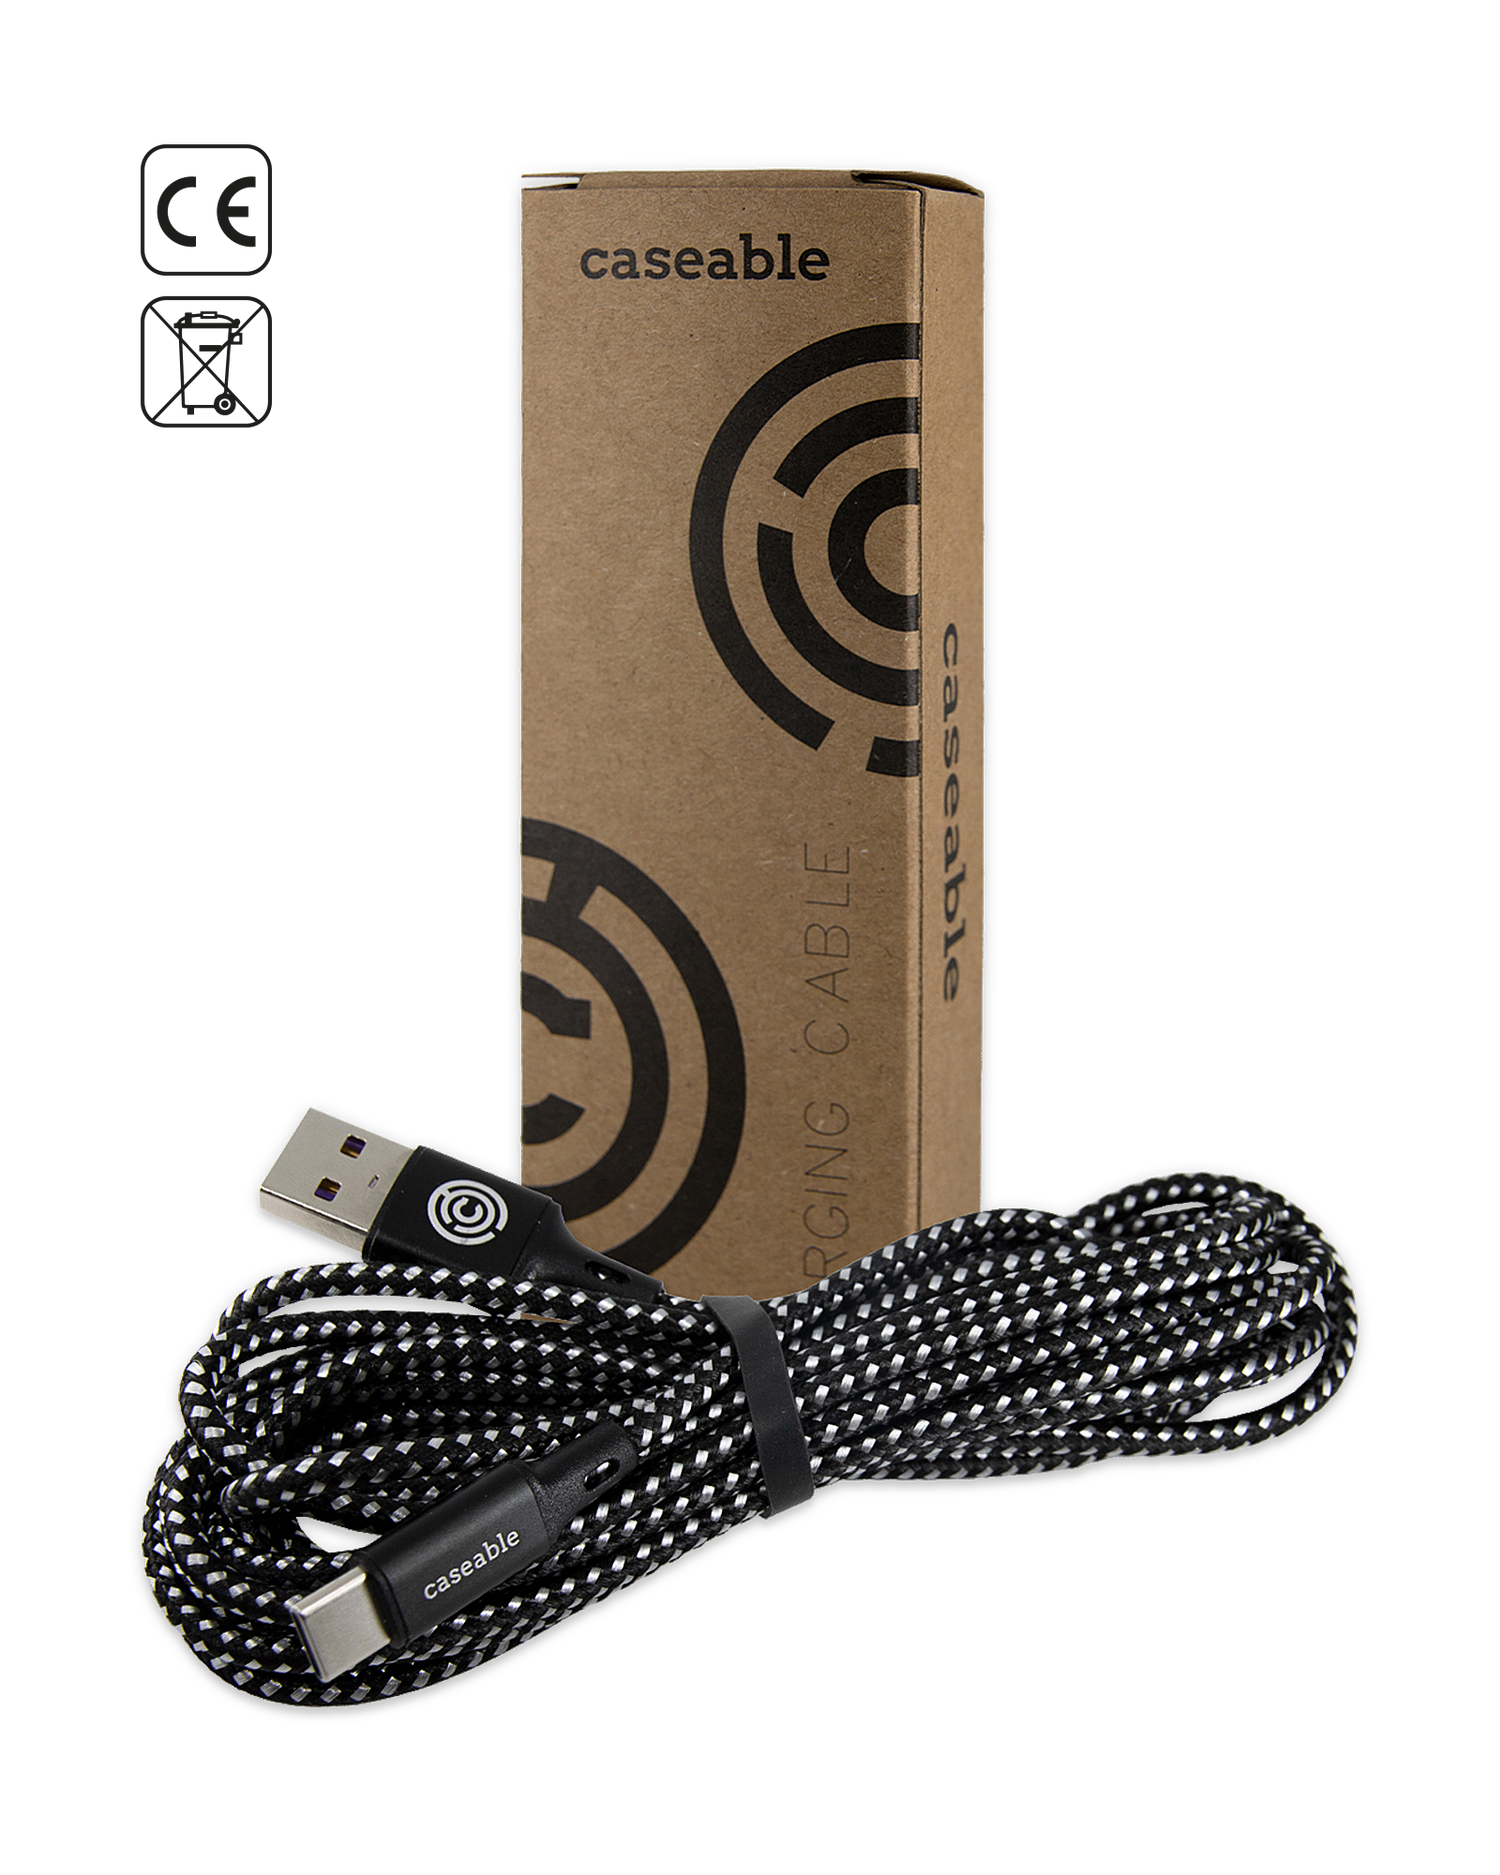 Extra-long USB-C Charging Cable with Packaging